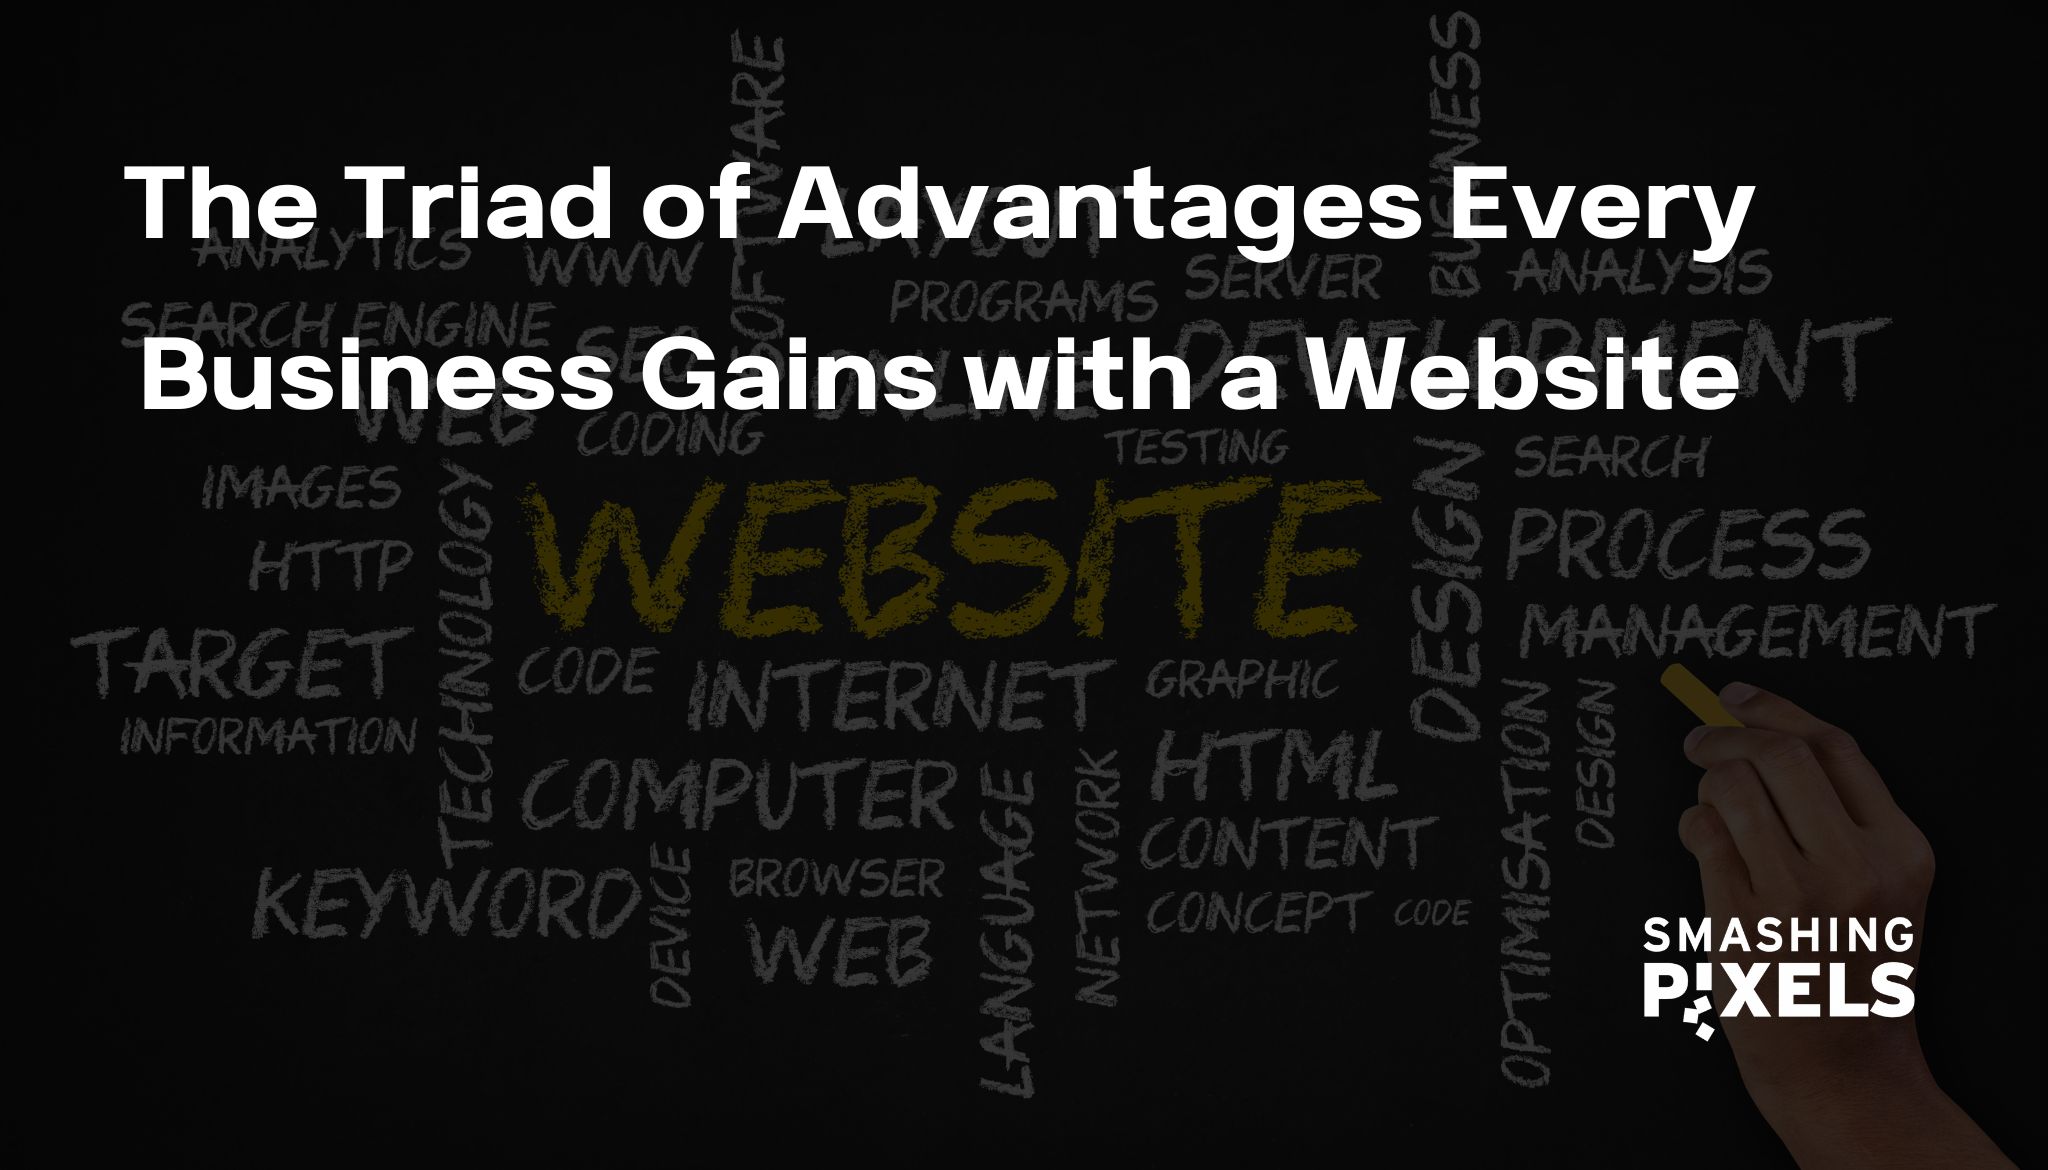 Trust, Traffic, Triumph: The Triad of Advantages Every Business Gains with a Website